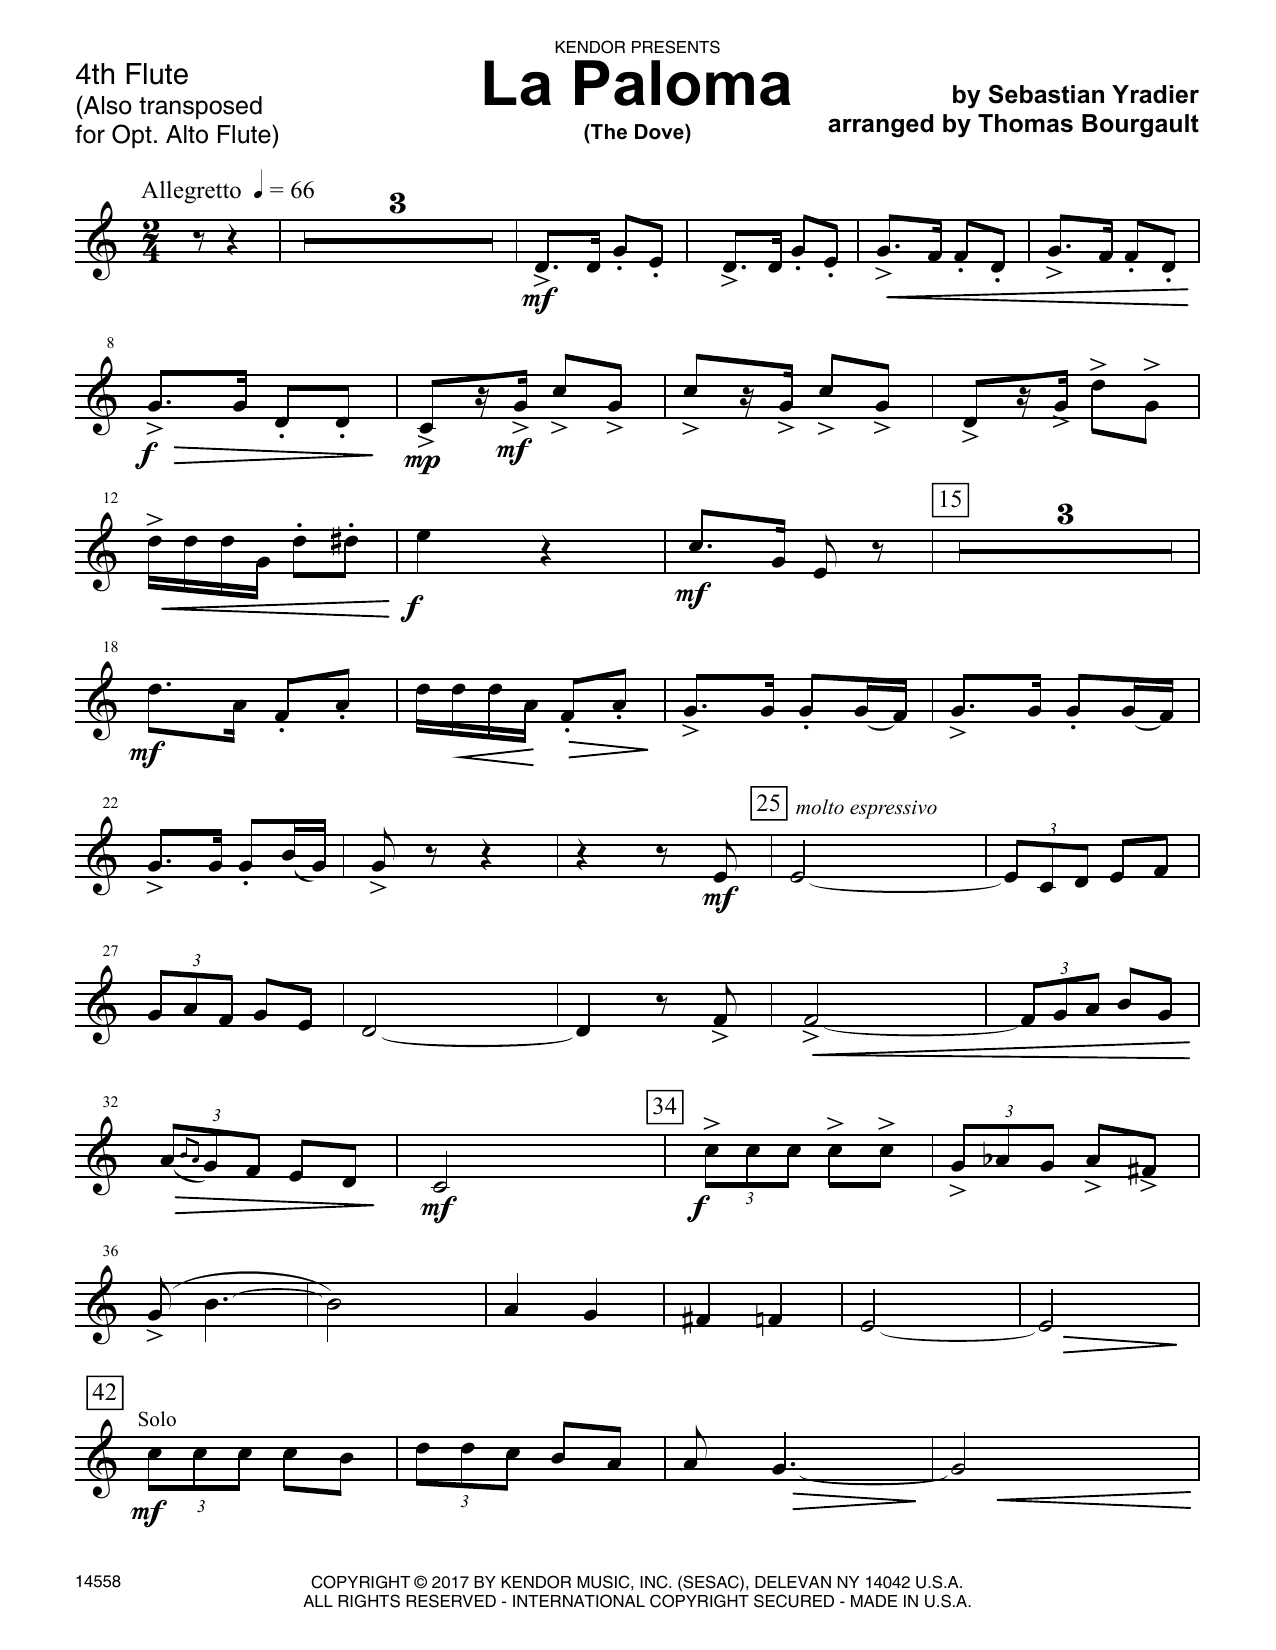 Download Thomas Bourgault La Paloma (The Dove) - 4th Flute Sheet Music